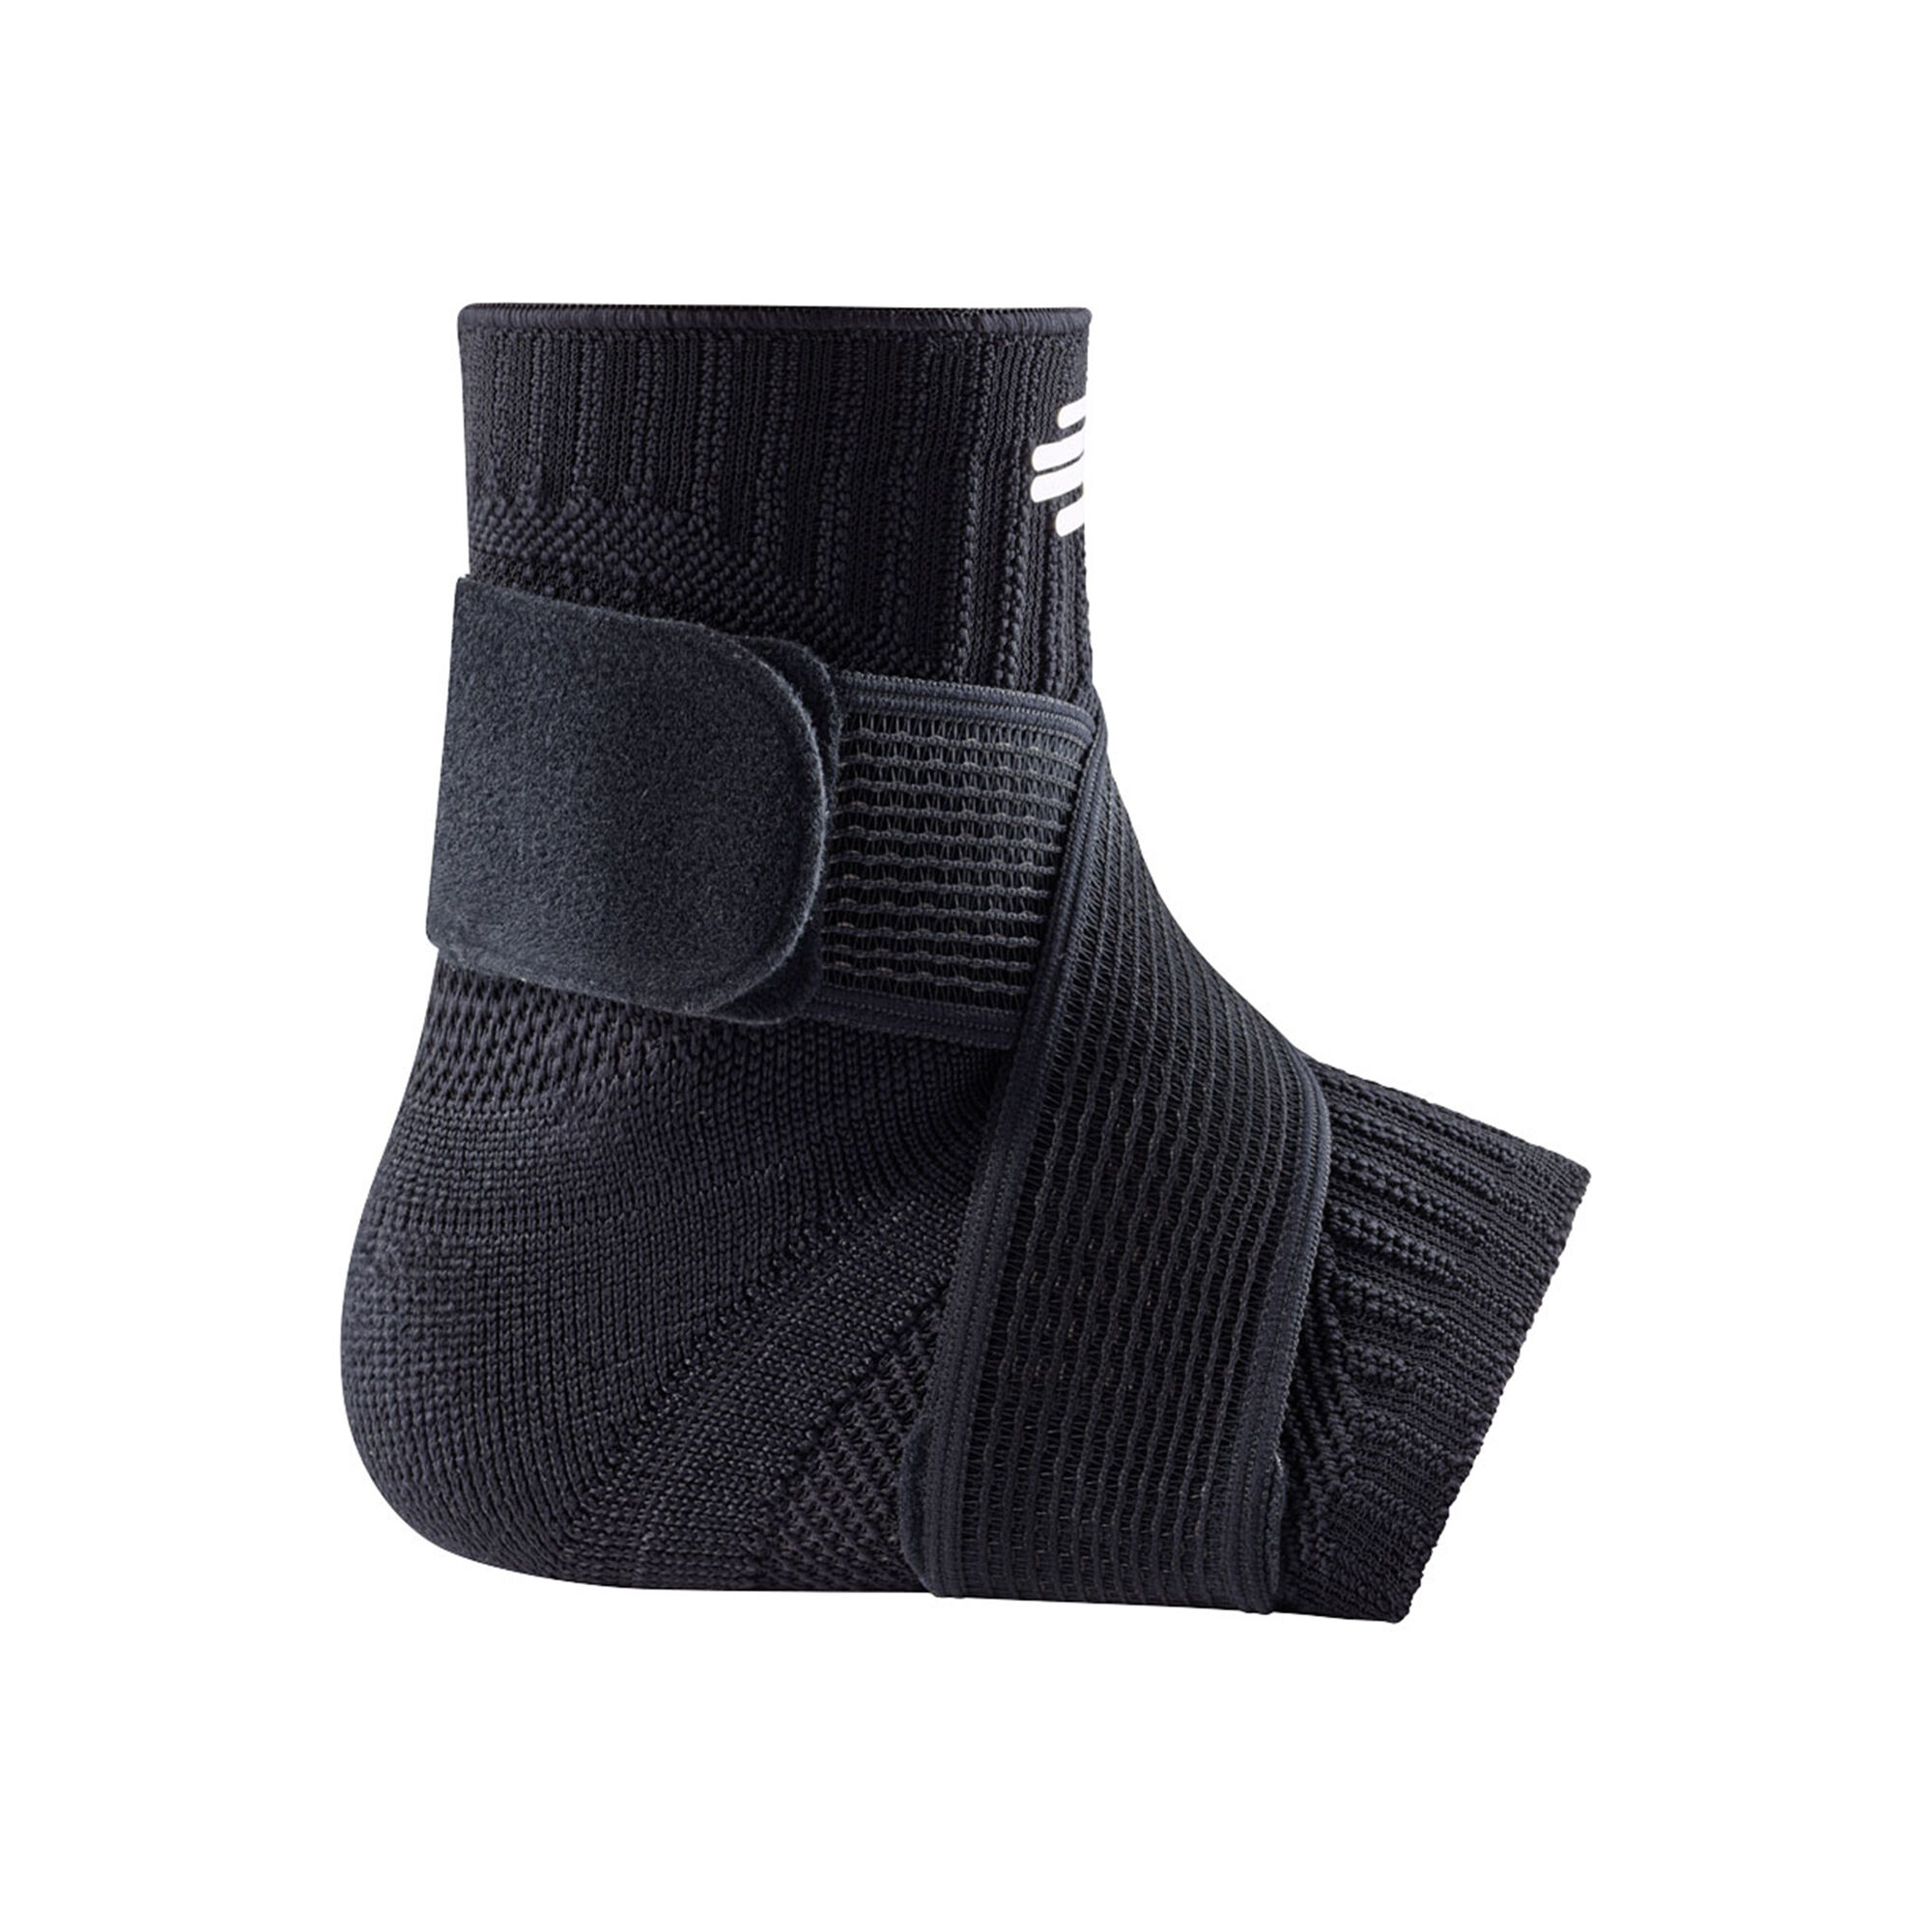 Buy Bauerfeind Sports Ankle Support Ankle Brace Right Black online